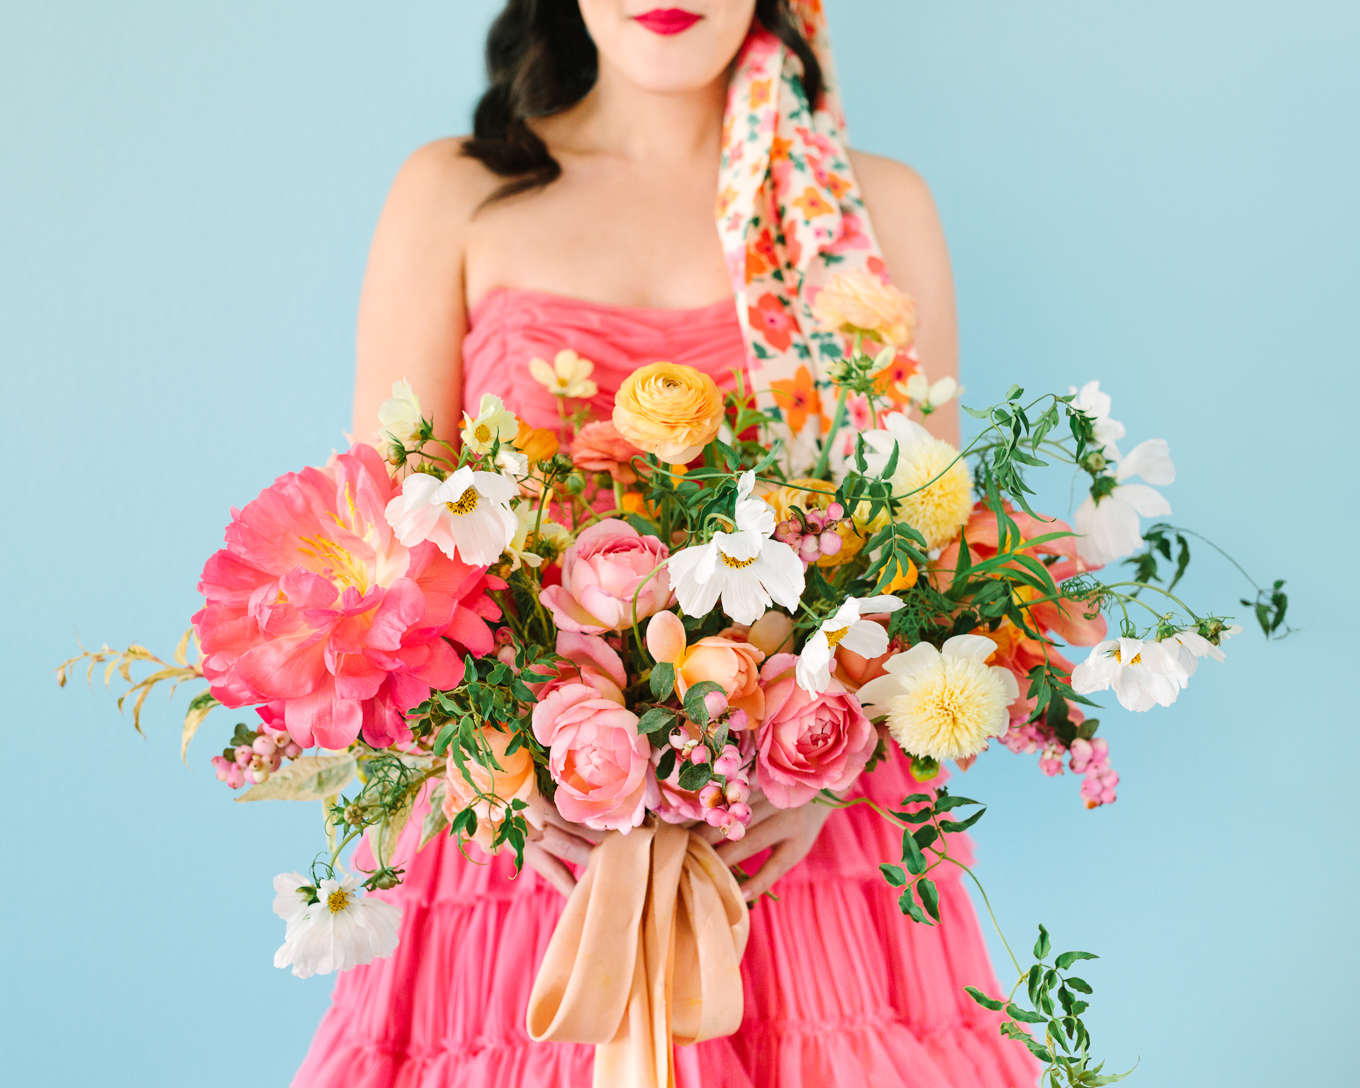 Aww Sam's pink peony bouquet | Beautiful bridal bouquet inspiration and advice | Colorful and elevated wedding photography for fun-loving couples in Southern California | #weddingflowers #weddingbouquet #bridebouquet #bouquetideas #uniquebouquet   Source: Mary Costa Photography | Los Angeles